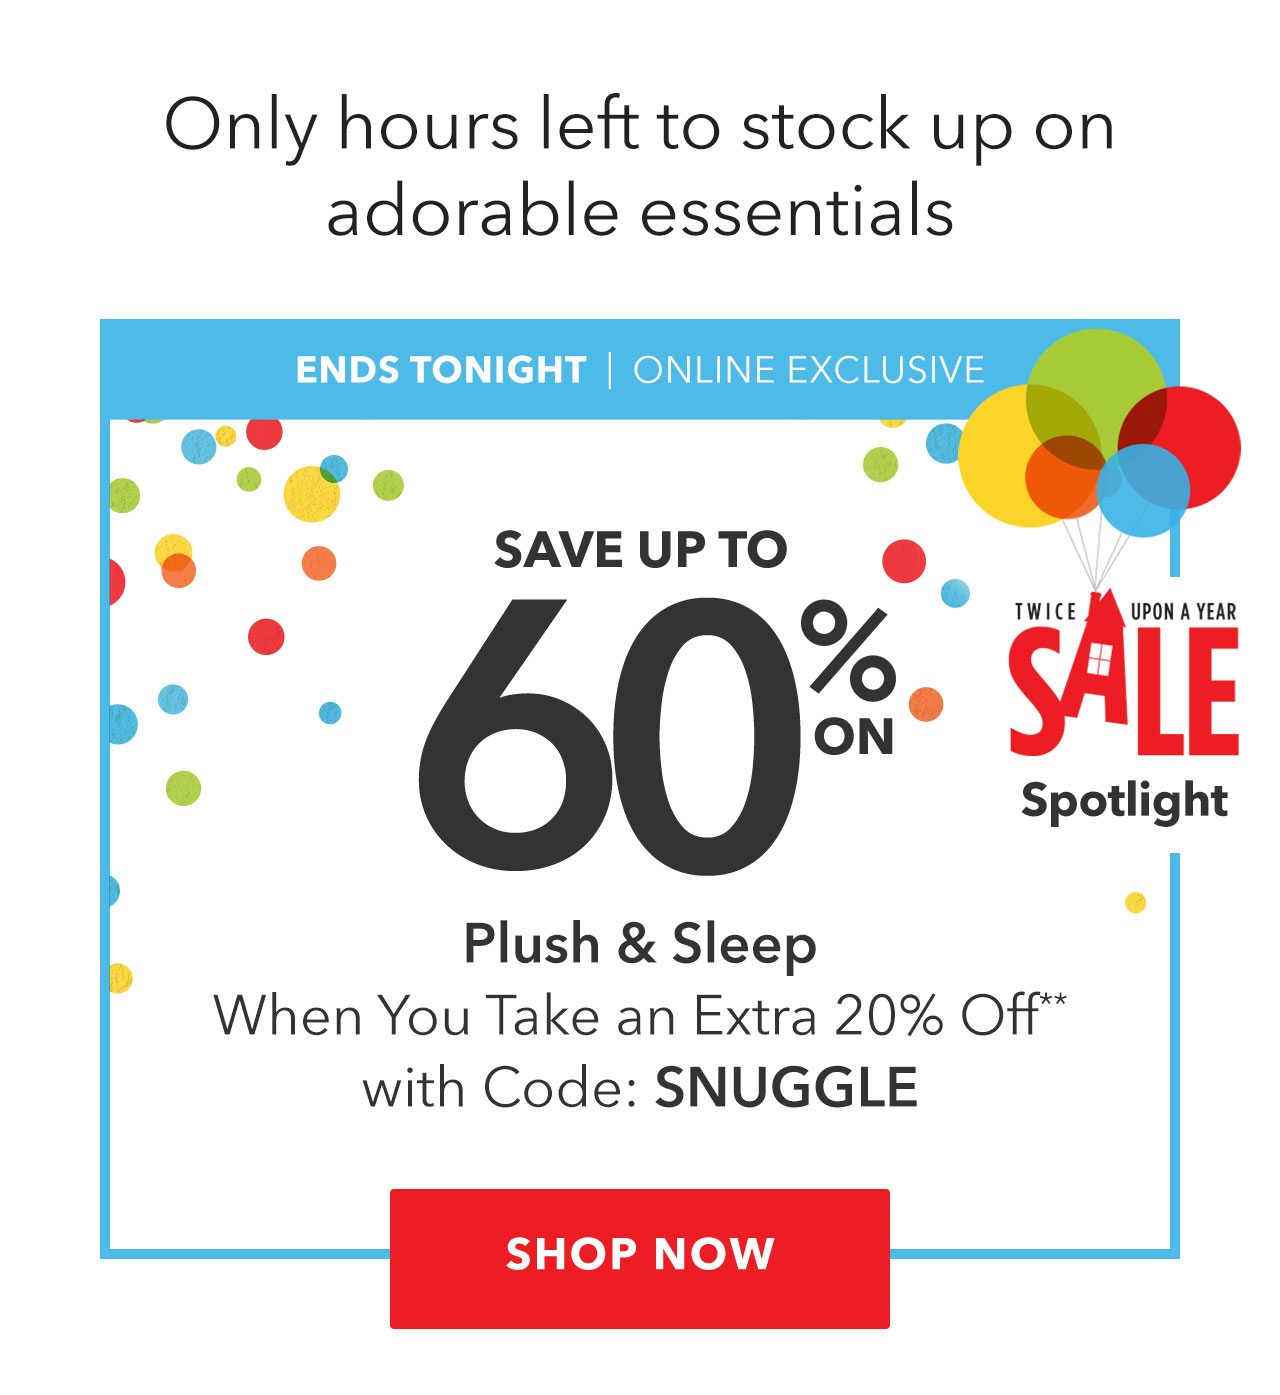 Save Up to 60% on Plush & Sleep When You Take an Extra 20% Off with Code: SNUGGLE | Shop Now